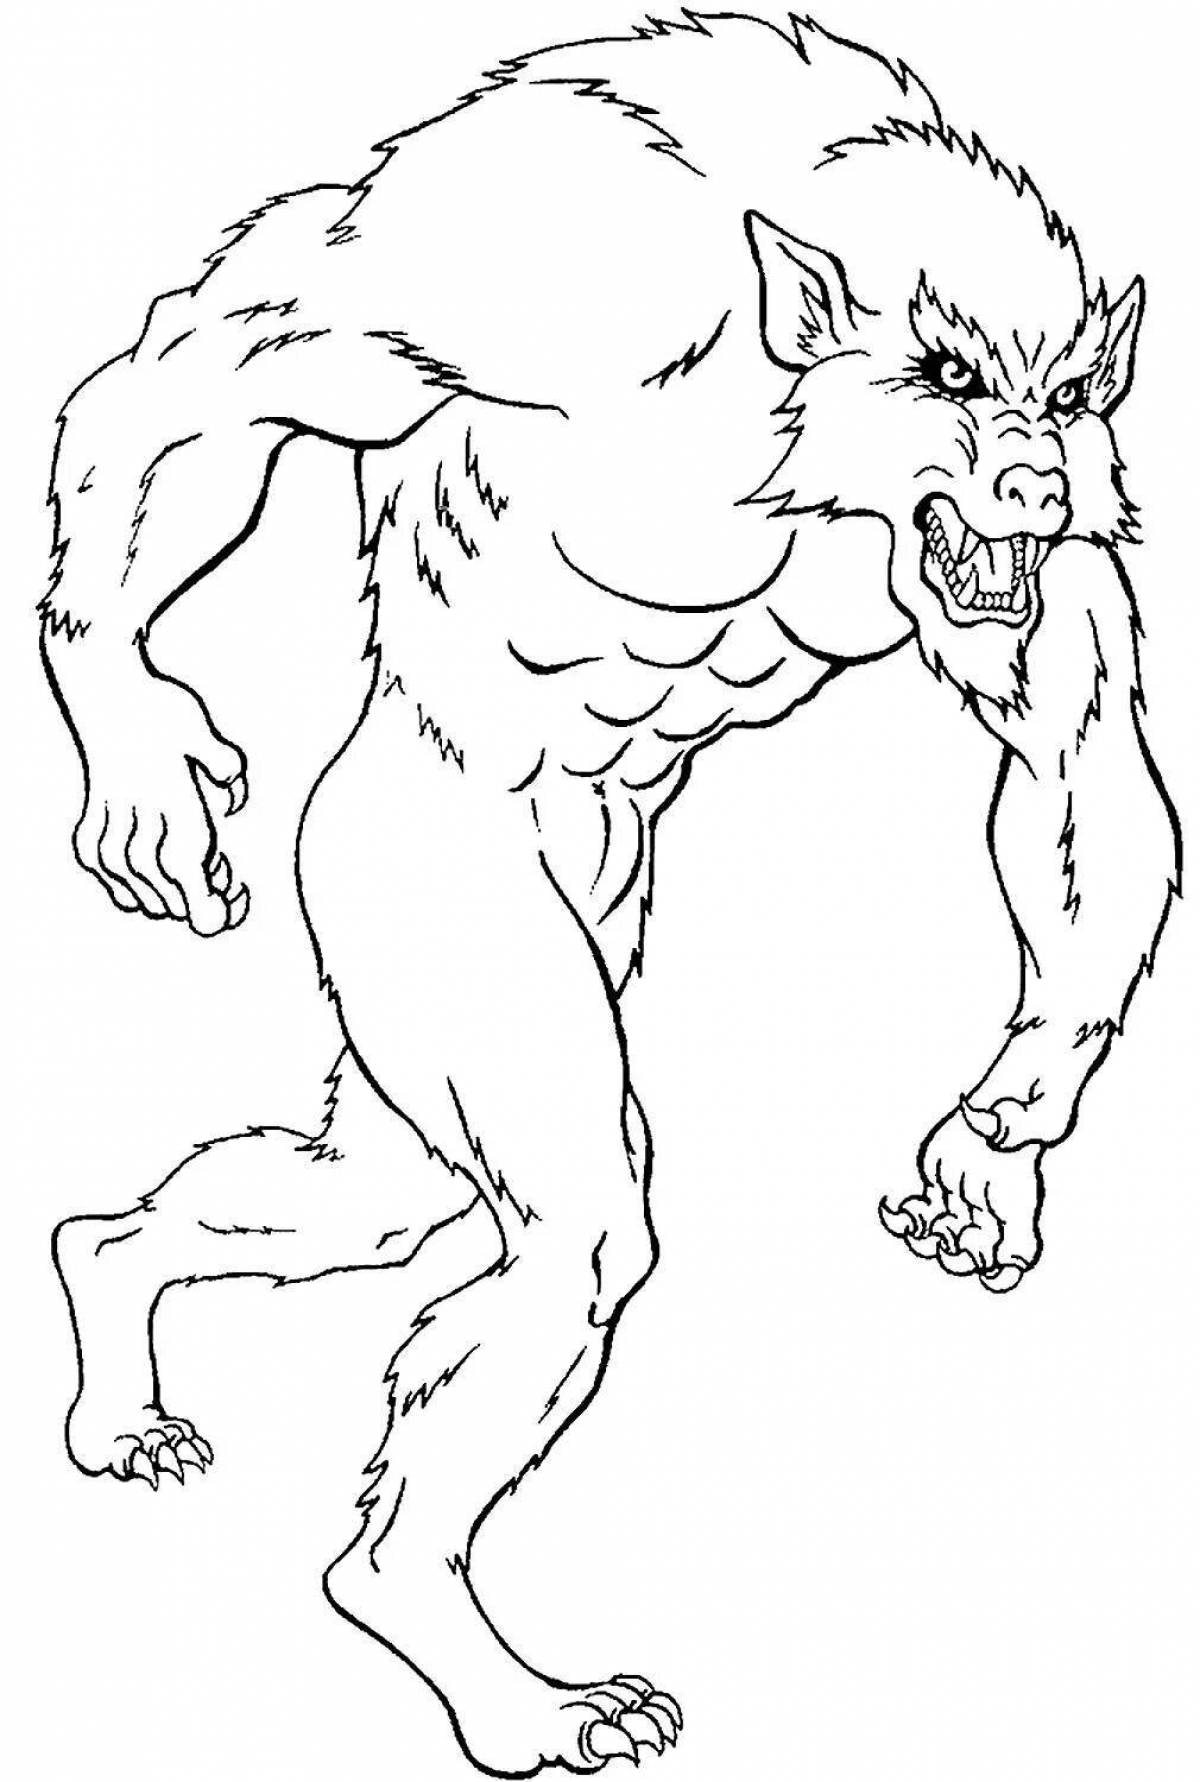 Creepy werewolf coloring pages for kids